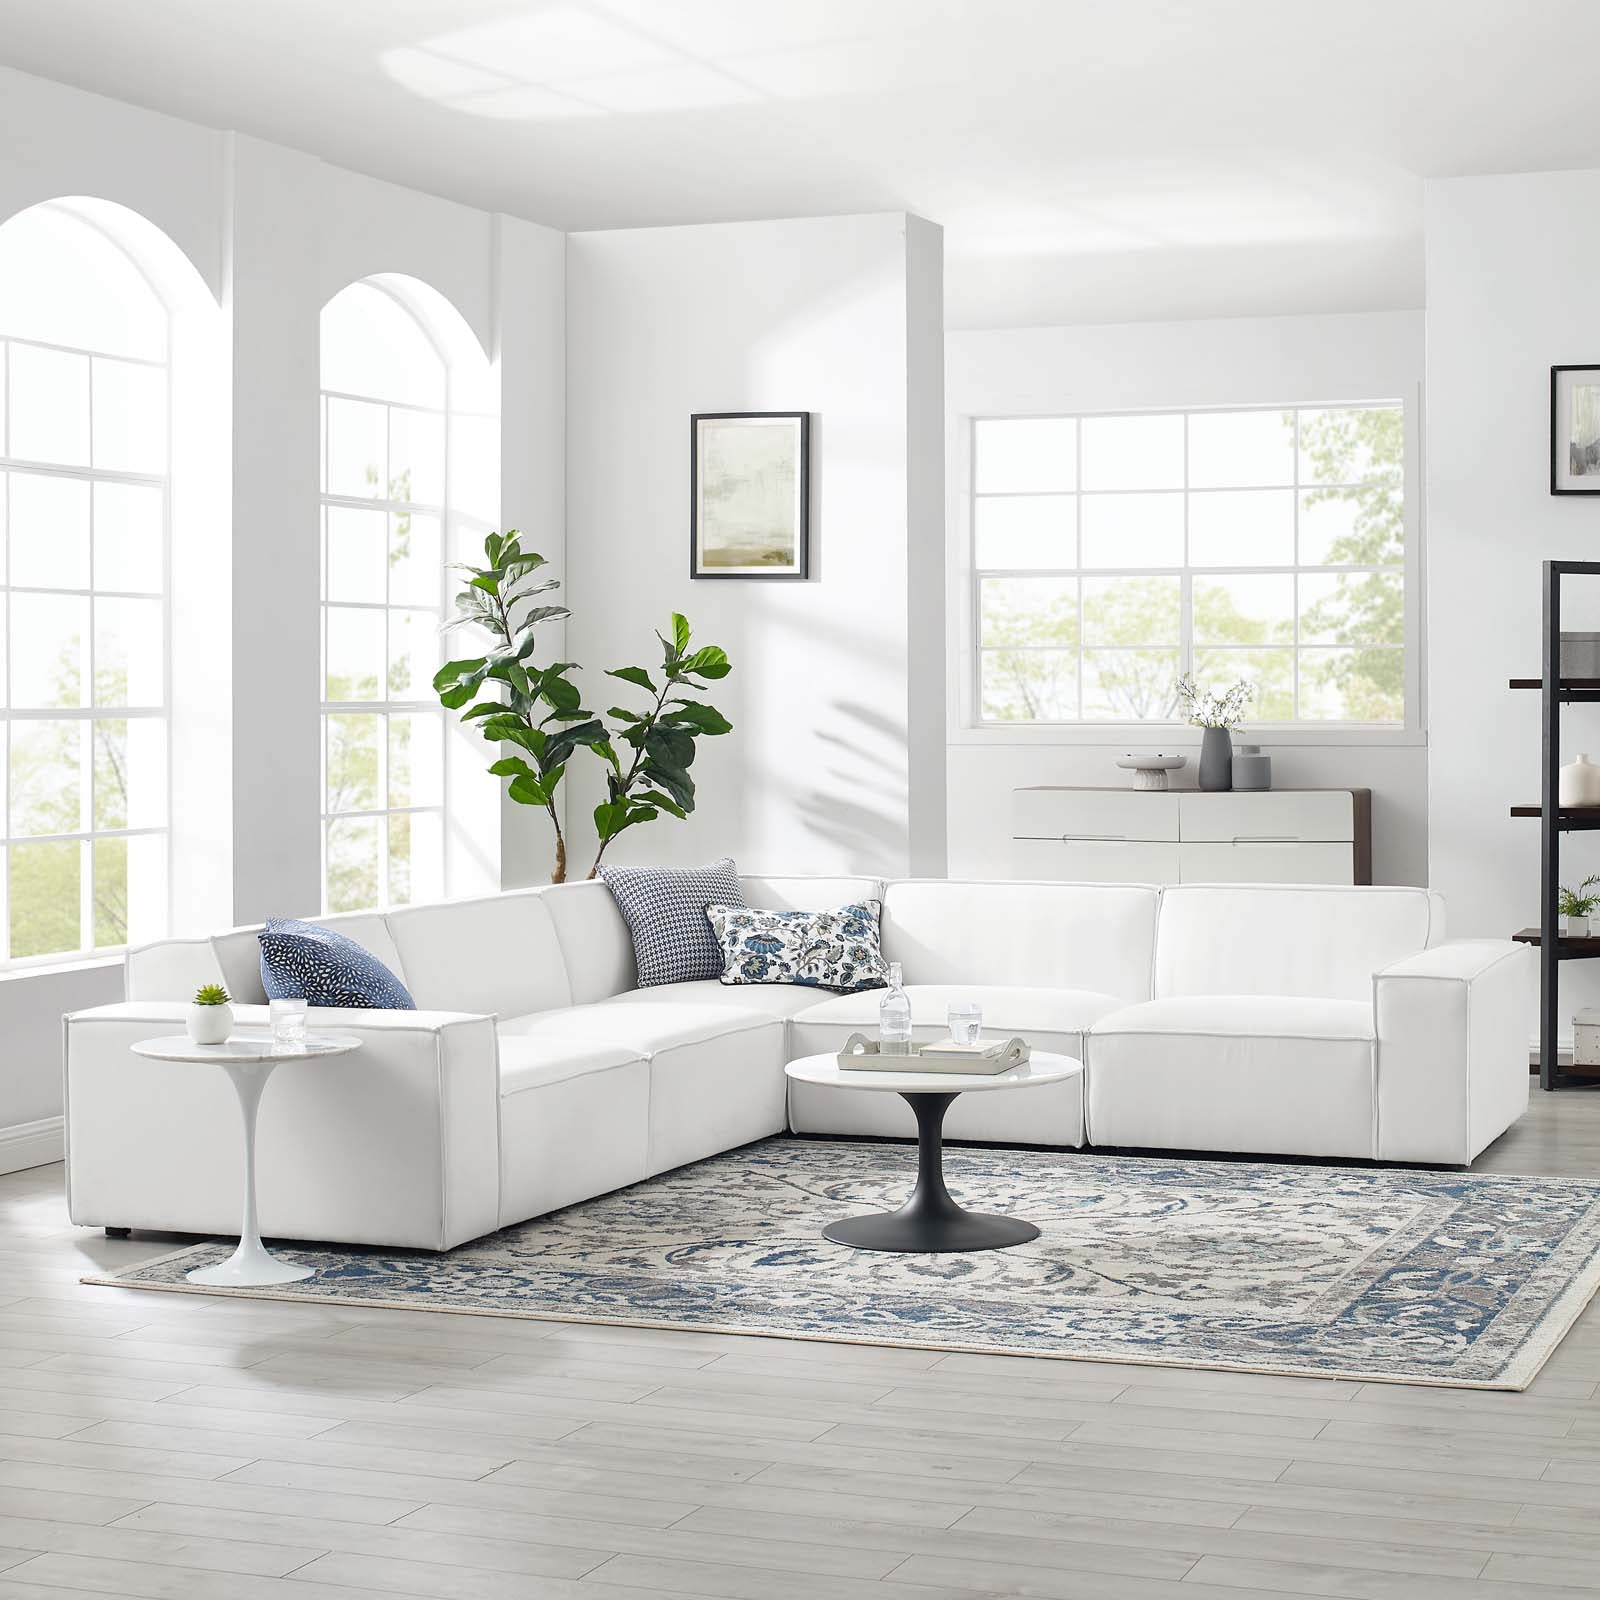 Restore 5-Piece Sectional Sofa - East Shore Modern Home Furnishings